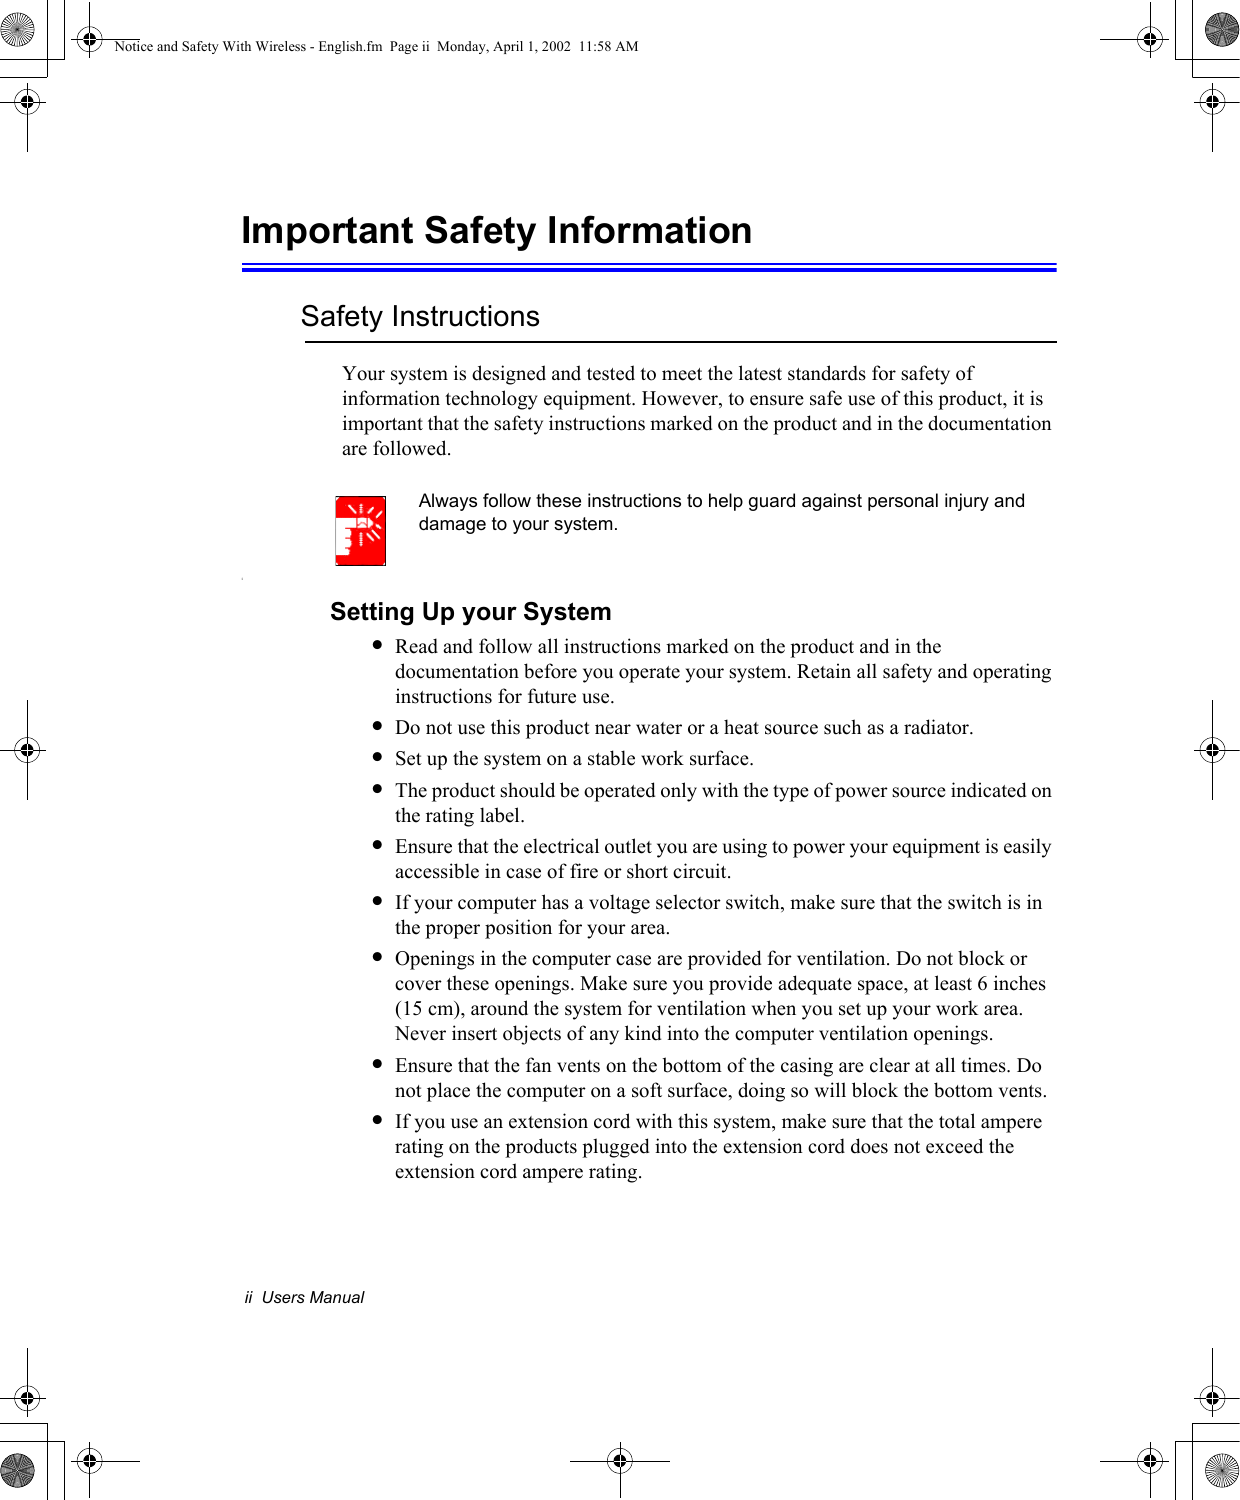 ii  Users ManualImportant Safety InformationSafety InstructionsYour system is designed and tested to meet the latest standards for safety of information technology equipment. However, to ensure safe use of this product, it is important that the safety instructions marked on the product and in the documentation are followed.Always follow these instructions to help guard against personal injury and damage to your system.iSetting Up your System•Read and follow all instructions marked on the product and in the documentation before you operate your system. Retain all safety and operating instructions for future use.•Do not use this product near water or a heat source such as a radiator.•Set up the system on a stable work surface.•The product should be operated only with the type of power source indicated on the rating label.•Ensure that the electrical outlet you are using to power your equipment is easily accessible in case of fire or short circuit.•If your computer has a voltage selector switch, make sure that the switch is in the proper position for your area.•Openings in the computer case are provided for ventilation. Do not block or cover these openings. Make sure you provide adequate space, at least 6 inches (15 cm), around the system for ventilation when you set up your work area.Never insert objects of any kind into the computer ventilation openings.•Ensure that the fan vents on the bottom of the casing are clear at all times. Do not place the computer on a soft surface, doing so will block the bottom vents.•If you use an extension cord with this system, make sure that the total ampere rating on the products plugged into the extension cord does not exceed the extension cord ampere rating.Notice and Safety With Wireless - English.fm  Page ii  Monday, April 1, 2002  11:58 AM